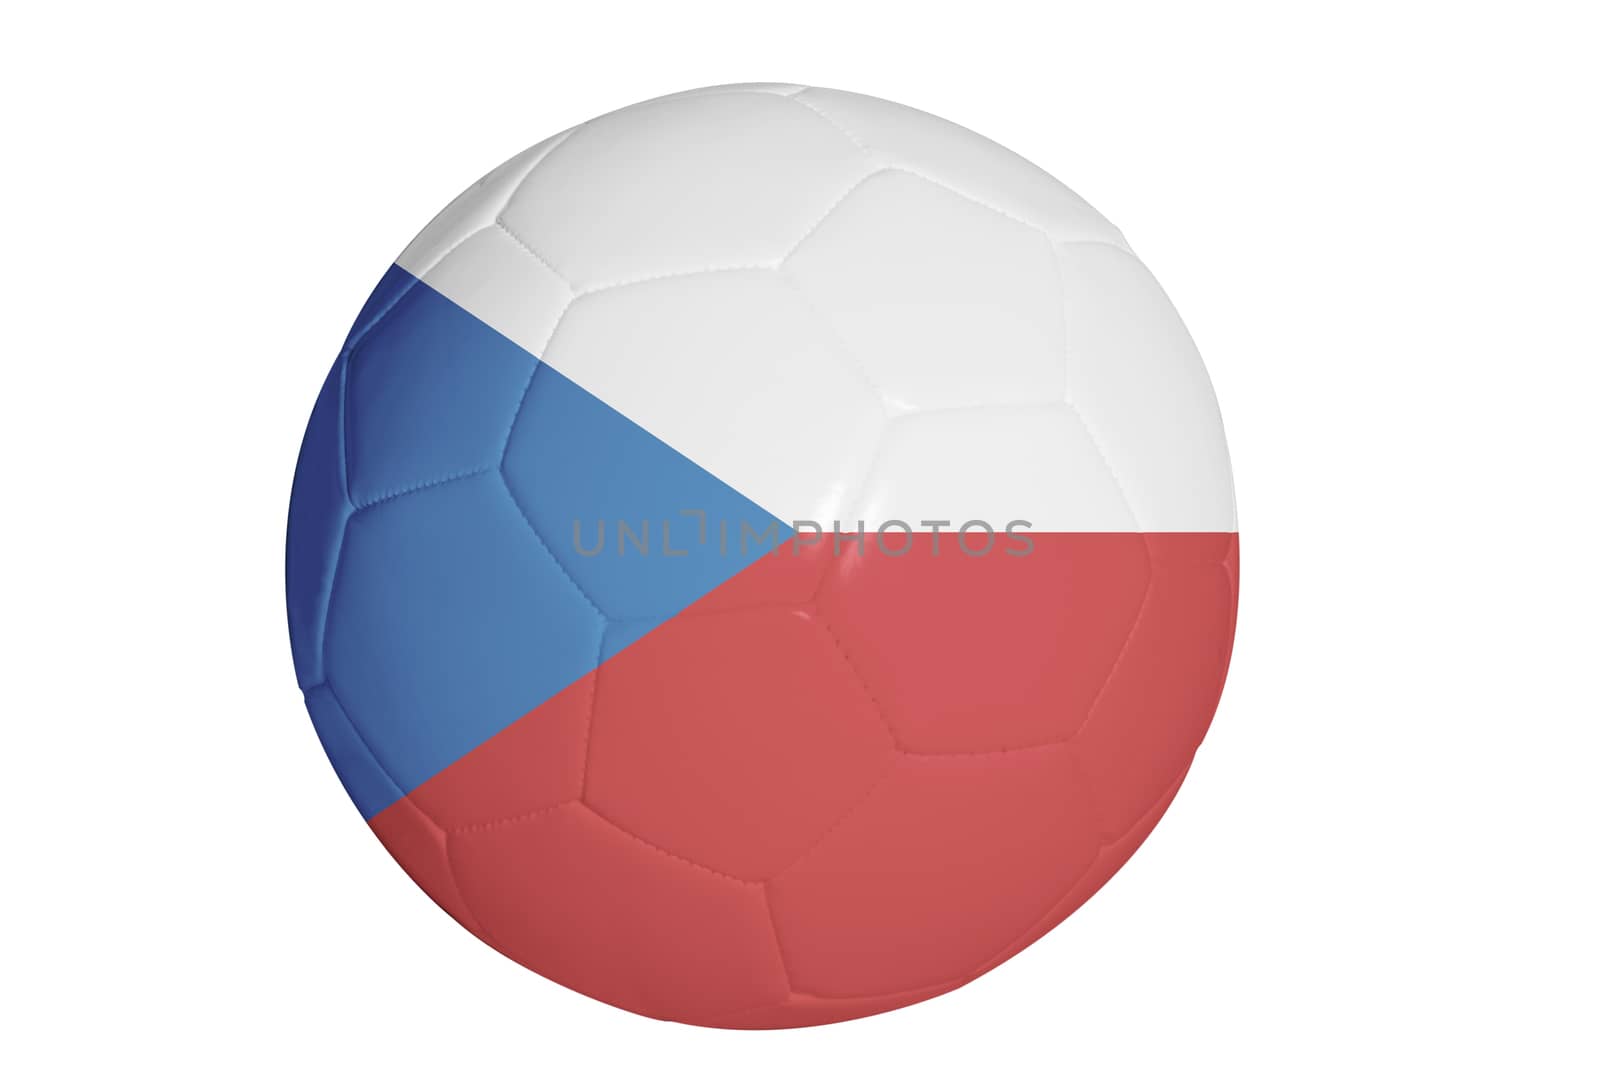 Czech republic flag graphic on soccer ball isolated on white